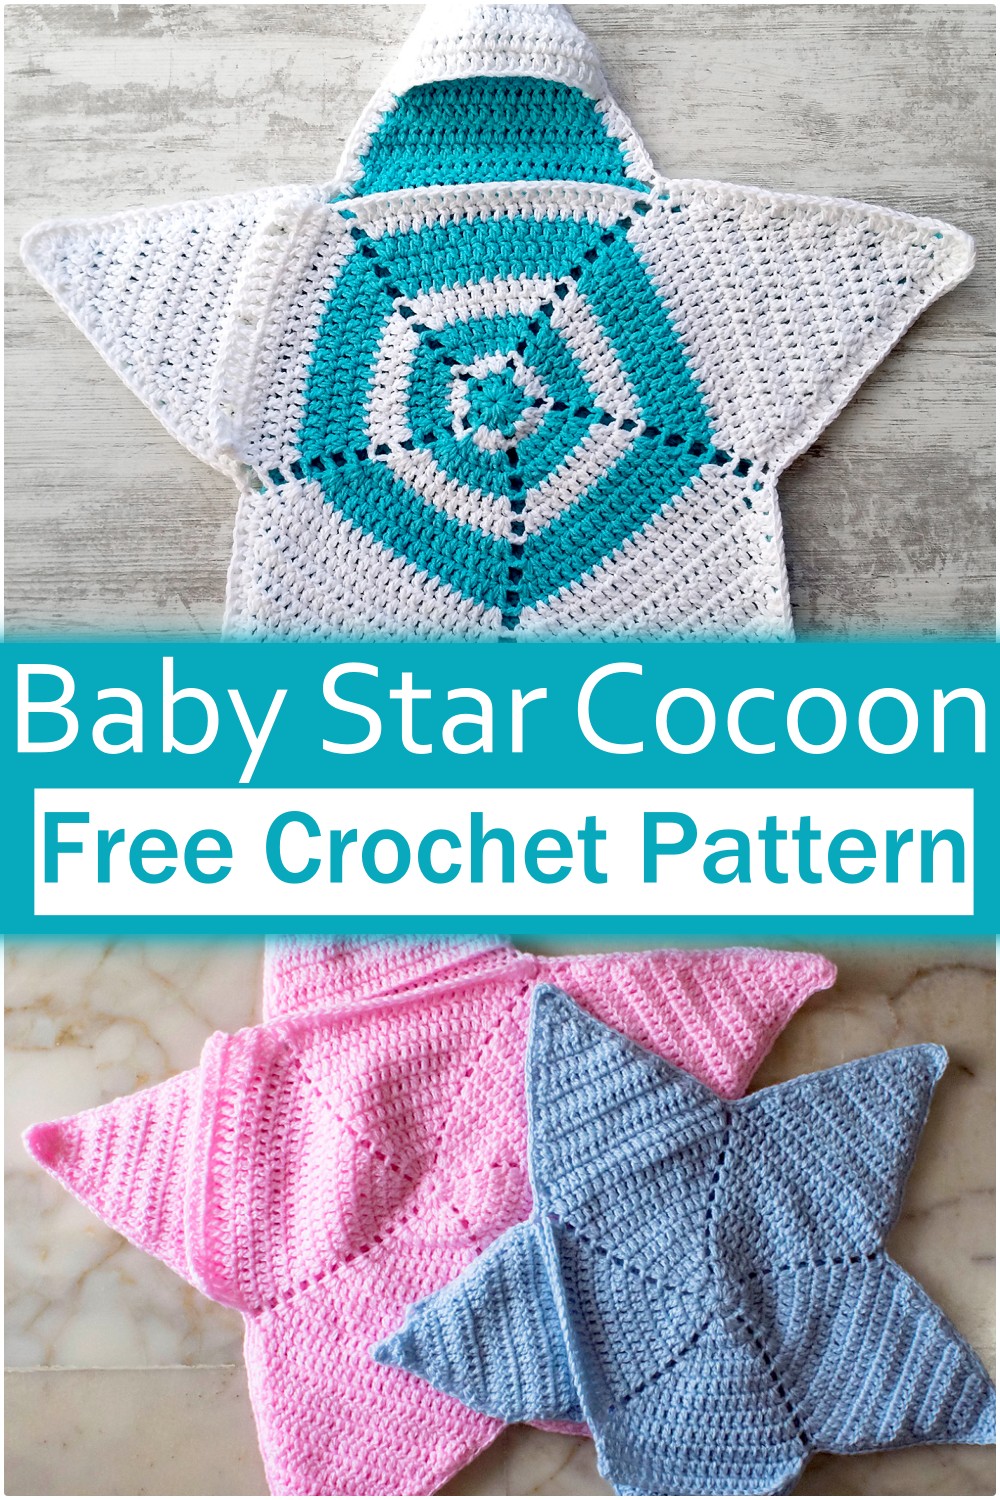 Baby Star Cocoon